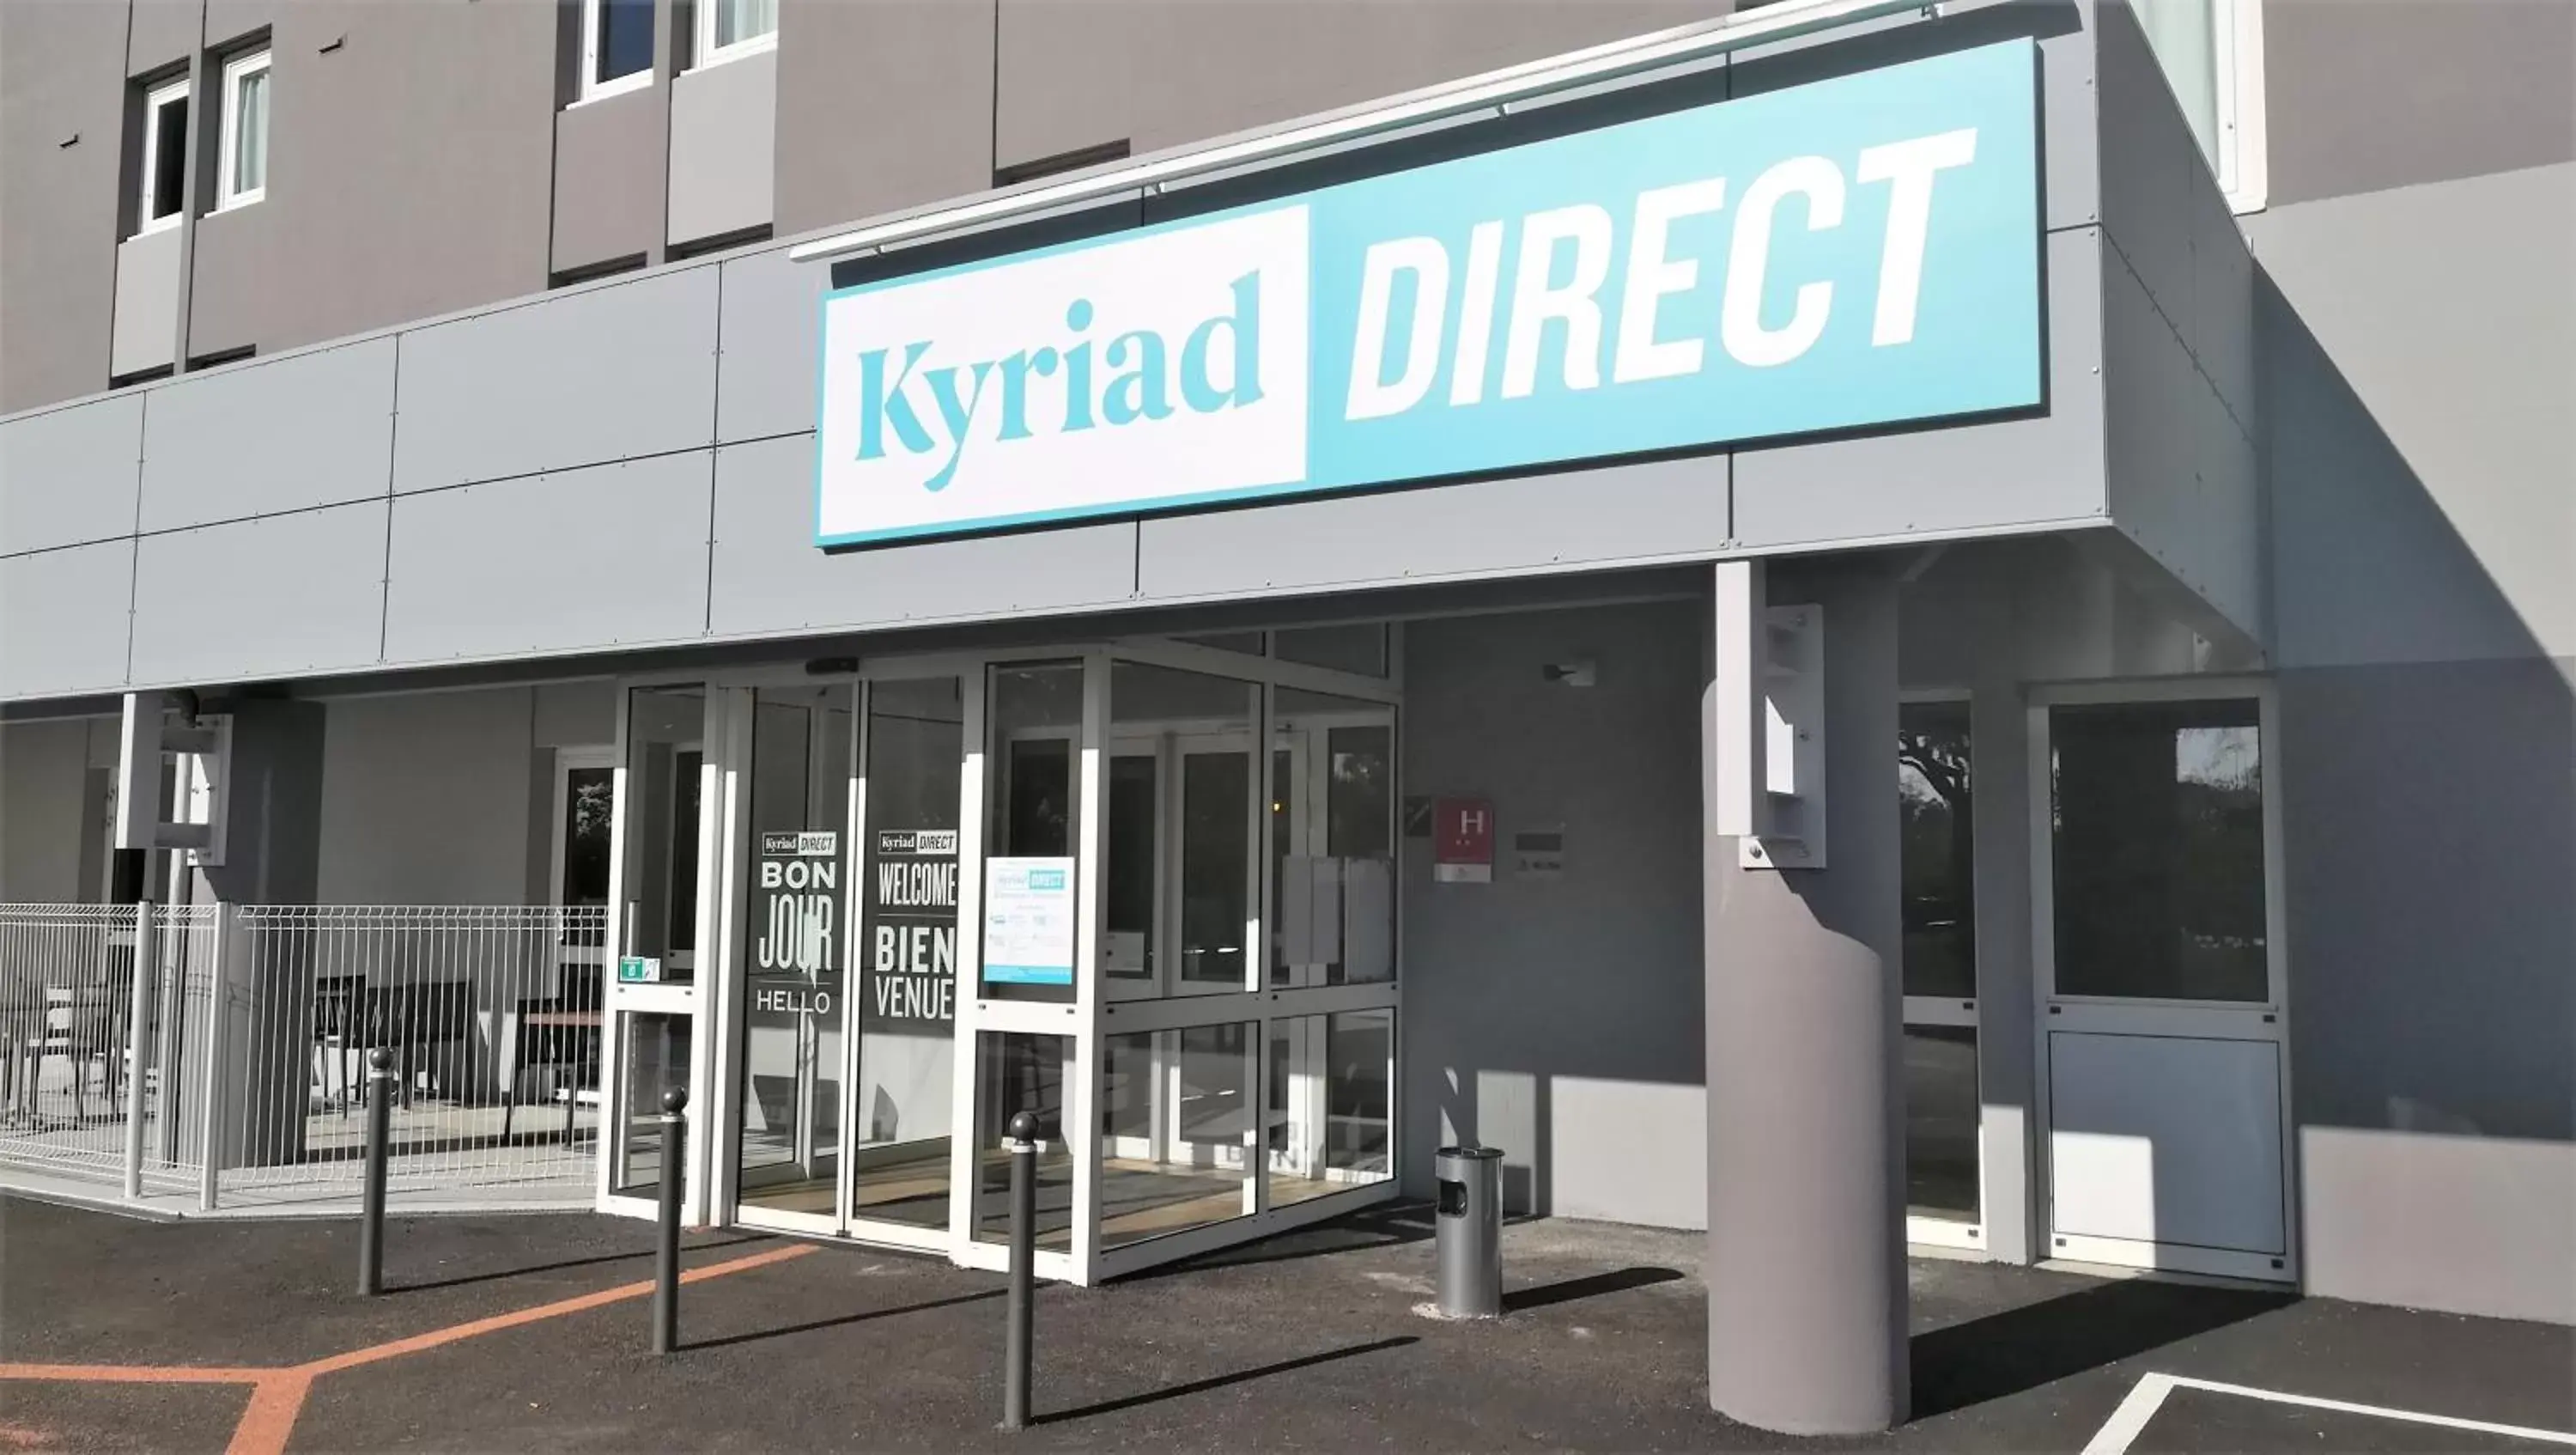 Property building in Kyriad Direct - Bourg les Valence